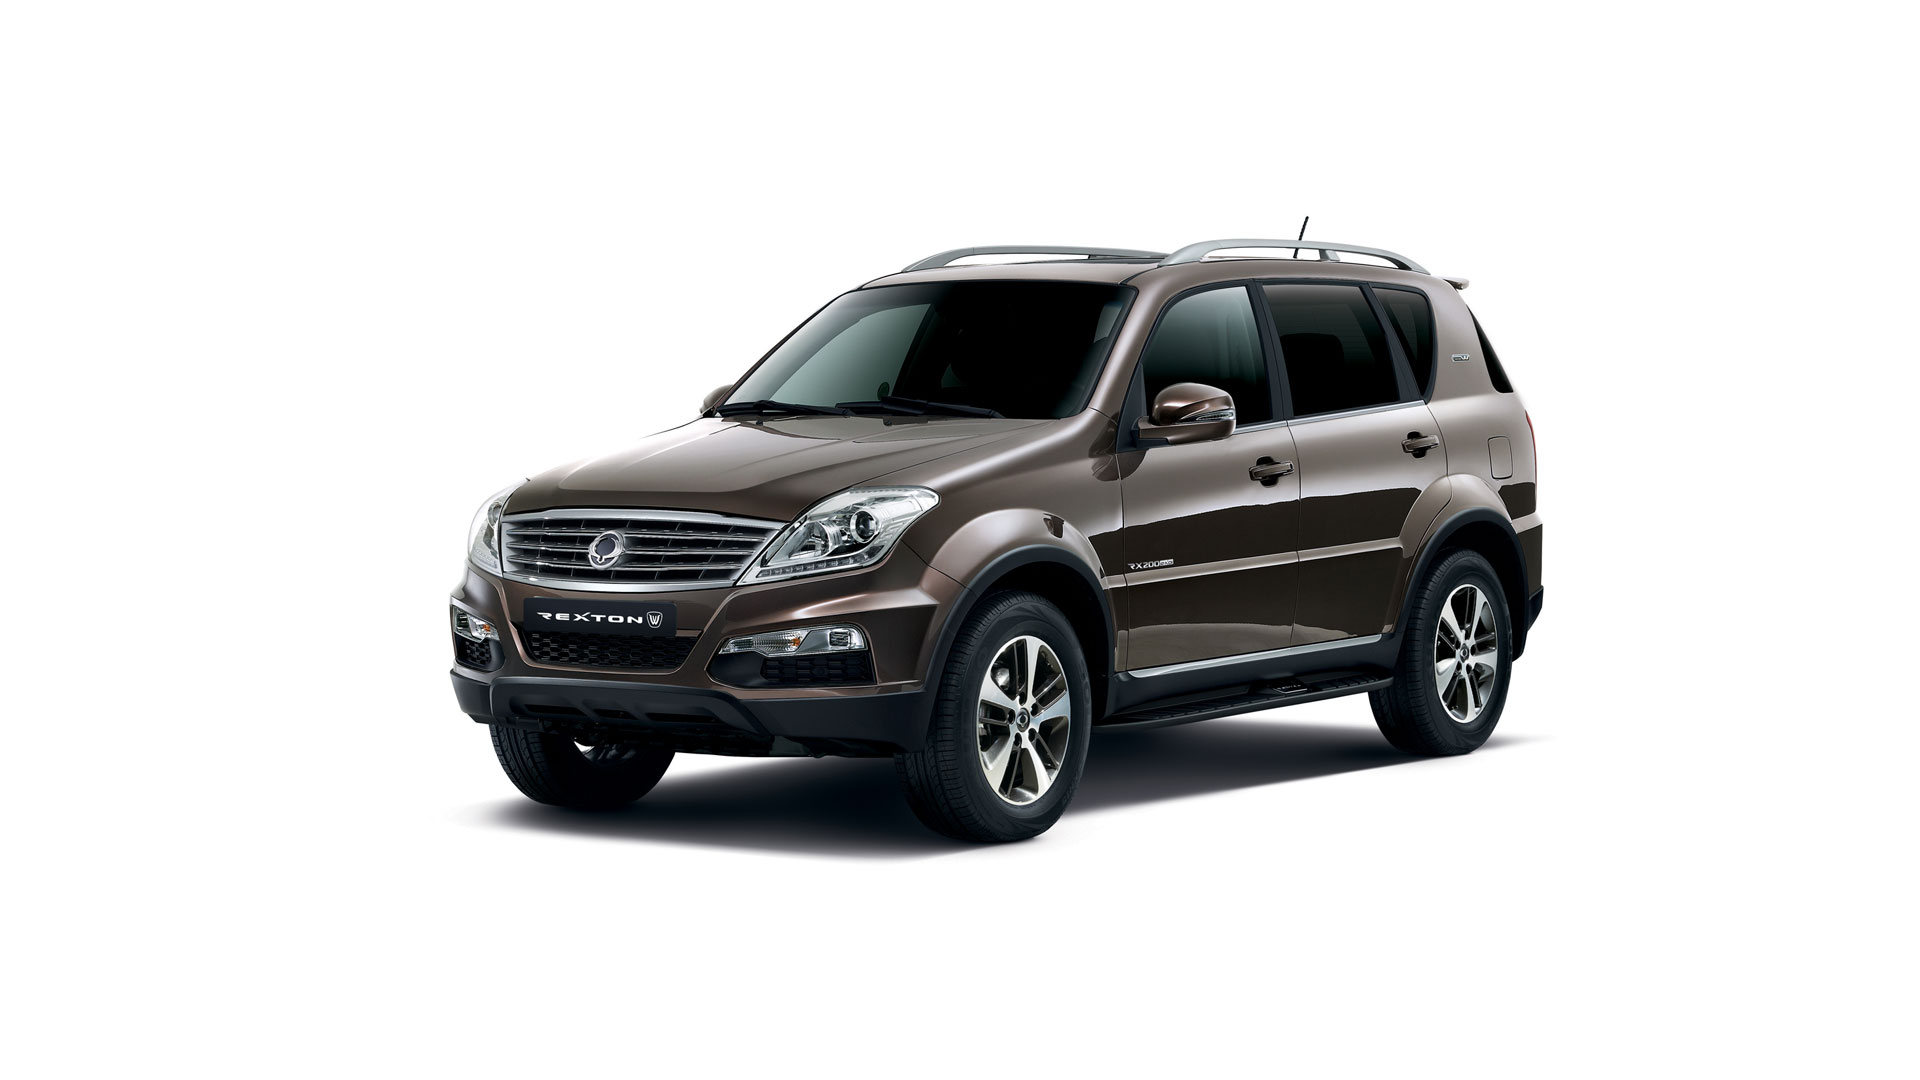 Санг енг рекстон 3. SSANGYONG Rexton 2012. ССАНГЙОНГ Рекстон 3. SSANGYONG Rexton 2012-2017. SSANGYONG Rexton II 2012.